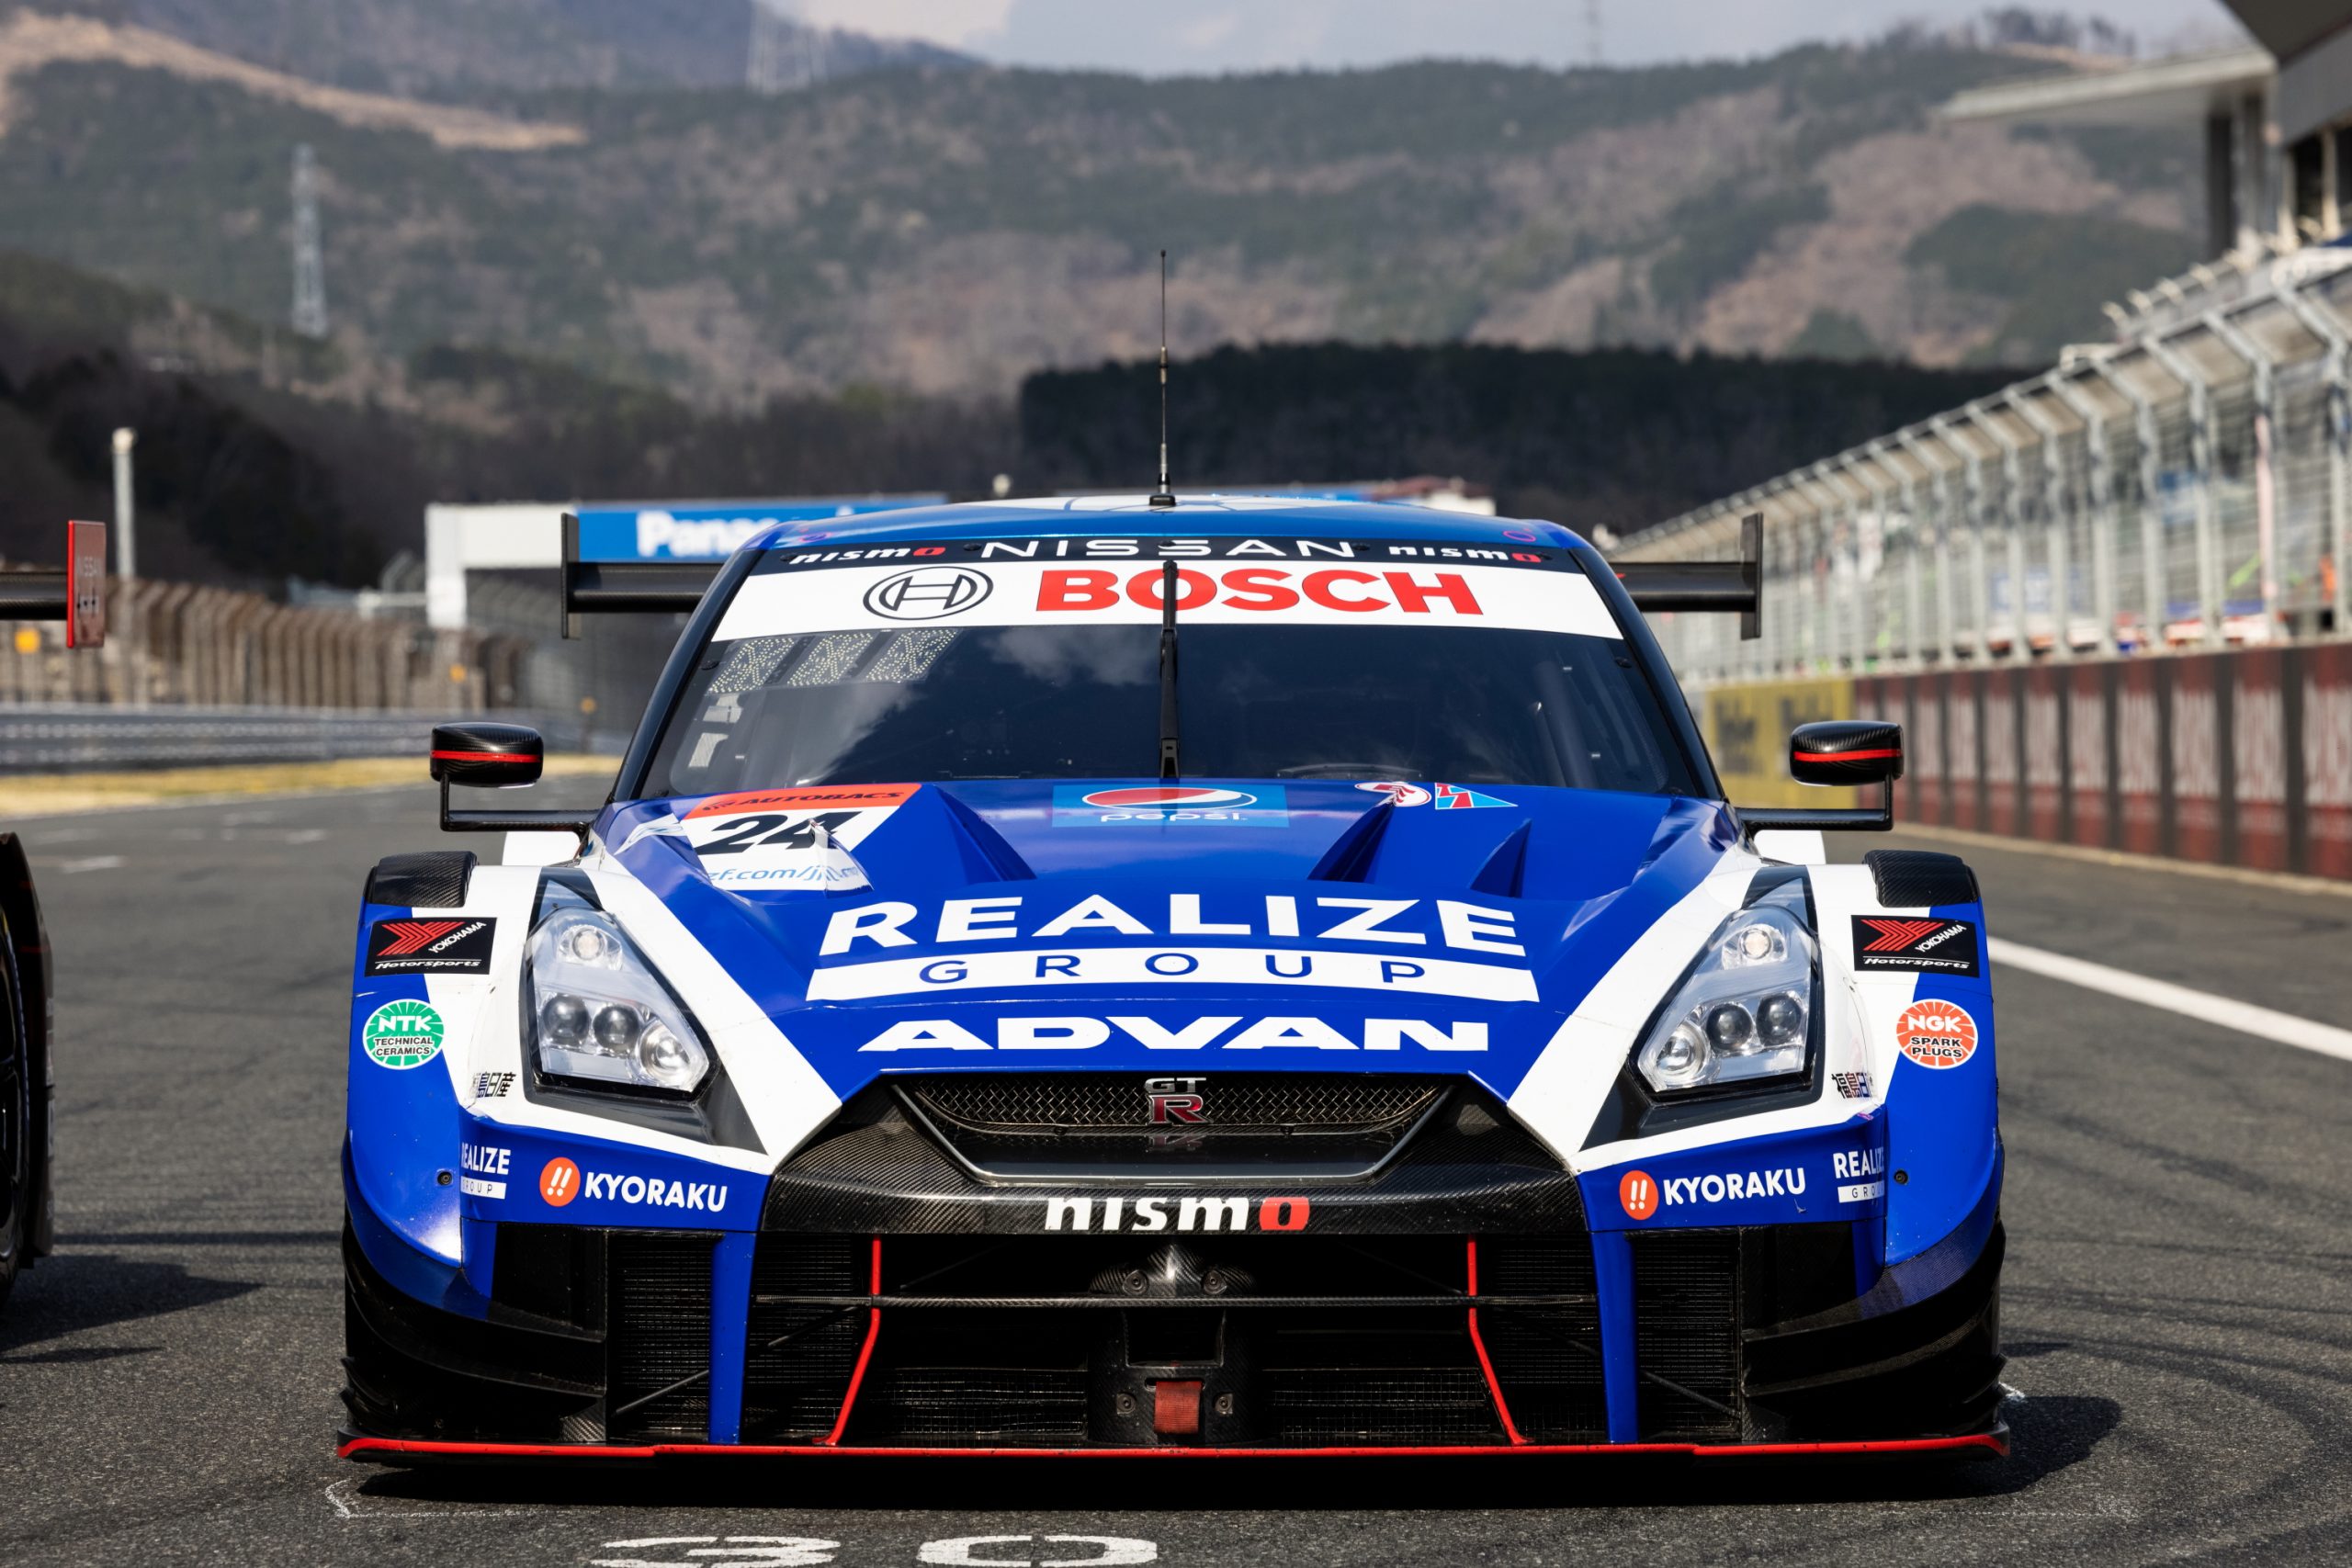 Nismo Nissan GT R NiSMO GT R R35 GT R Race Cars Race Tracks Livery Super GT Blue Cars Frontal View 2560x1707